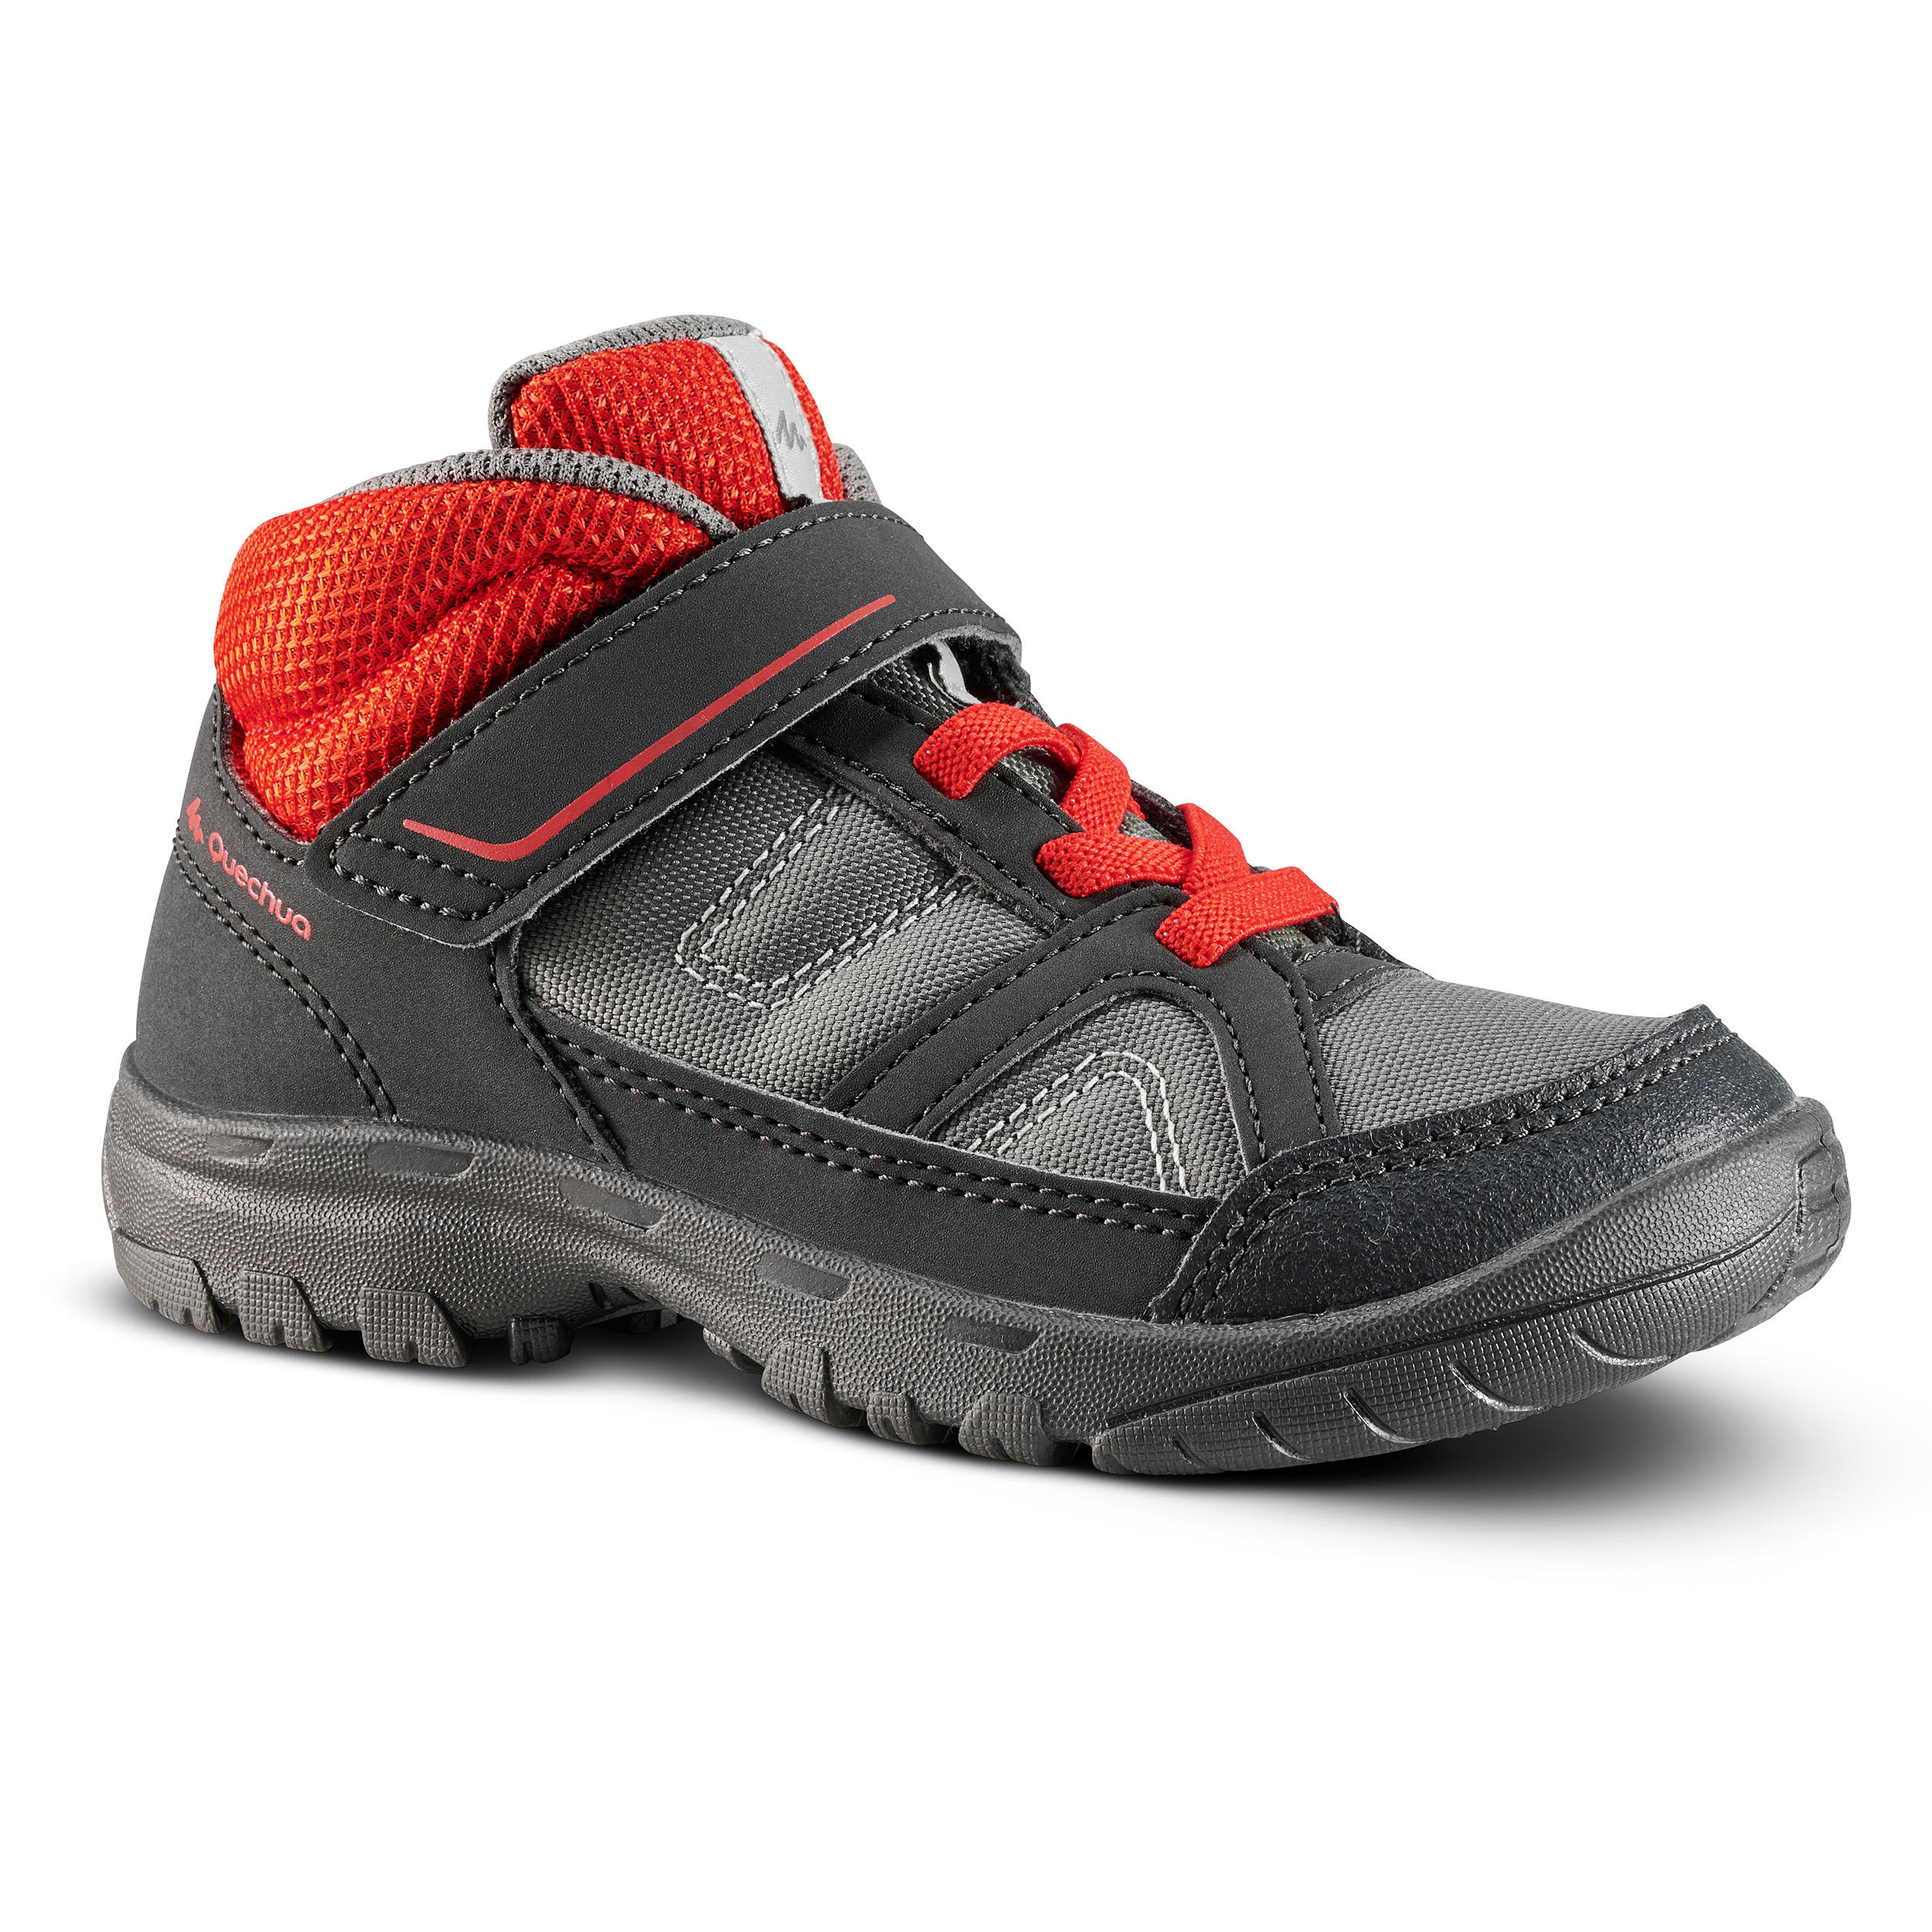 QUECHUA Kids High Top Hiking Shoes MH 100 MID KID 24 TO 34 - Grey/Red